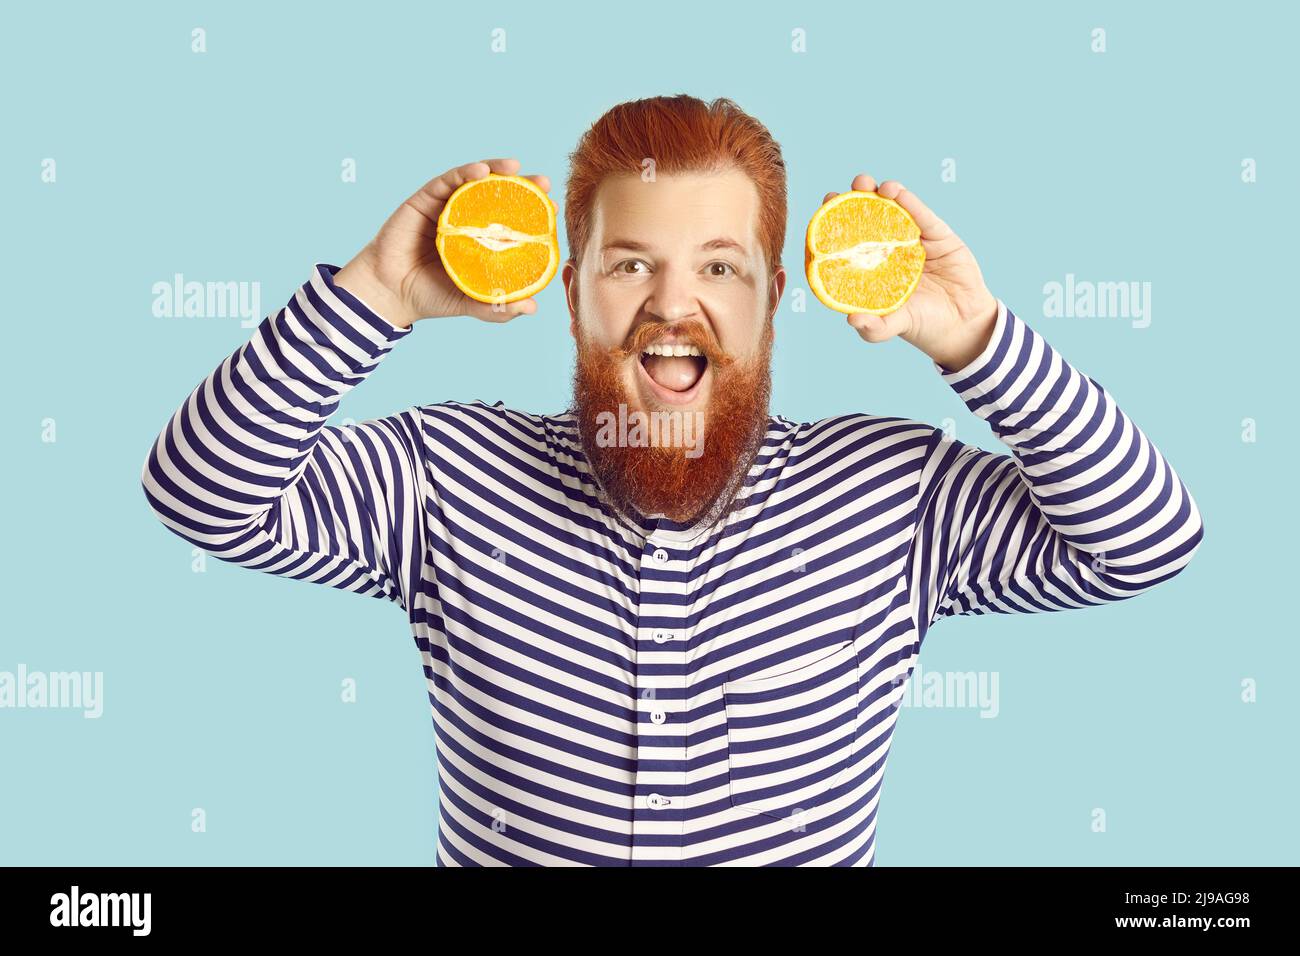 Funny happy fat man who likes eating fresh fruit is holding two orange halves and smiling Stock Photo